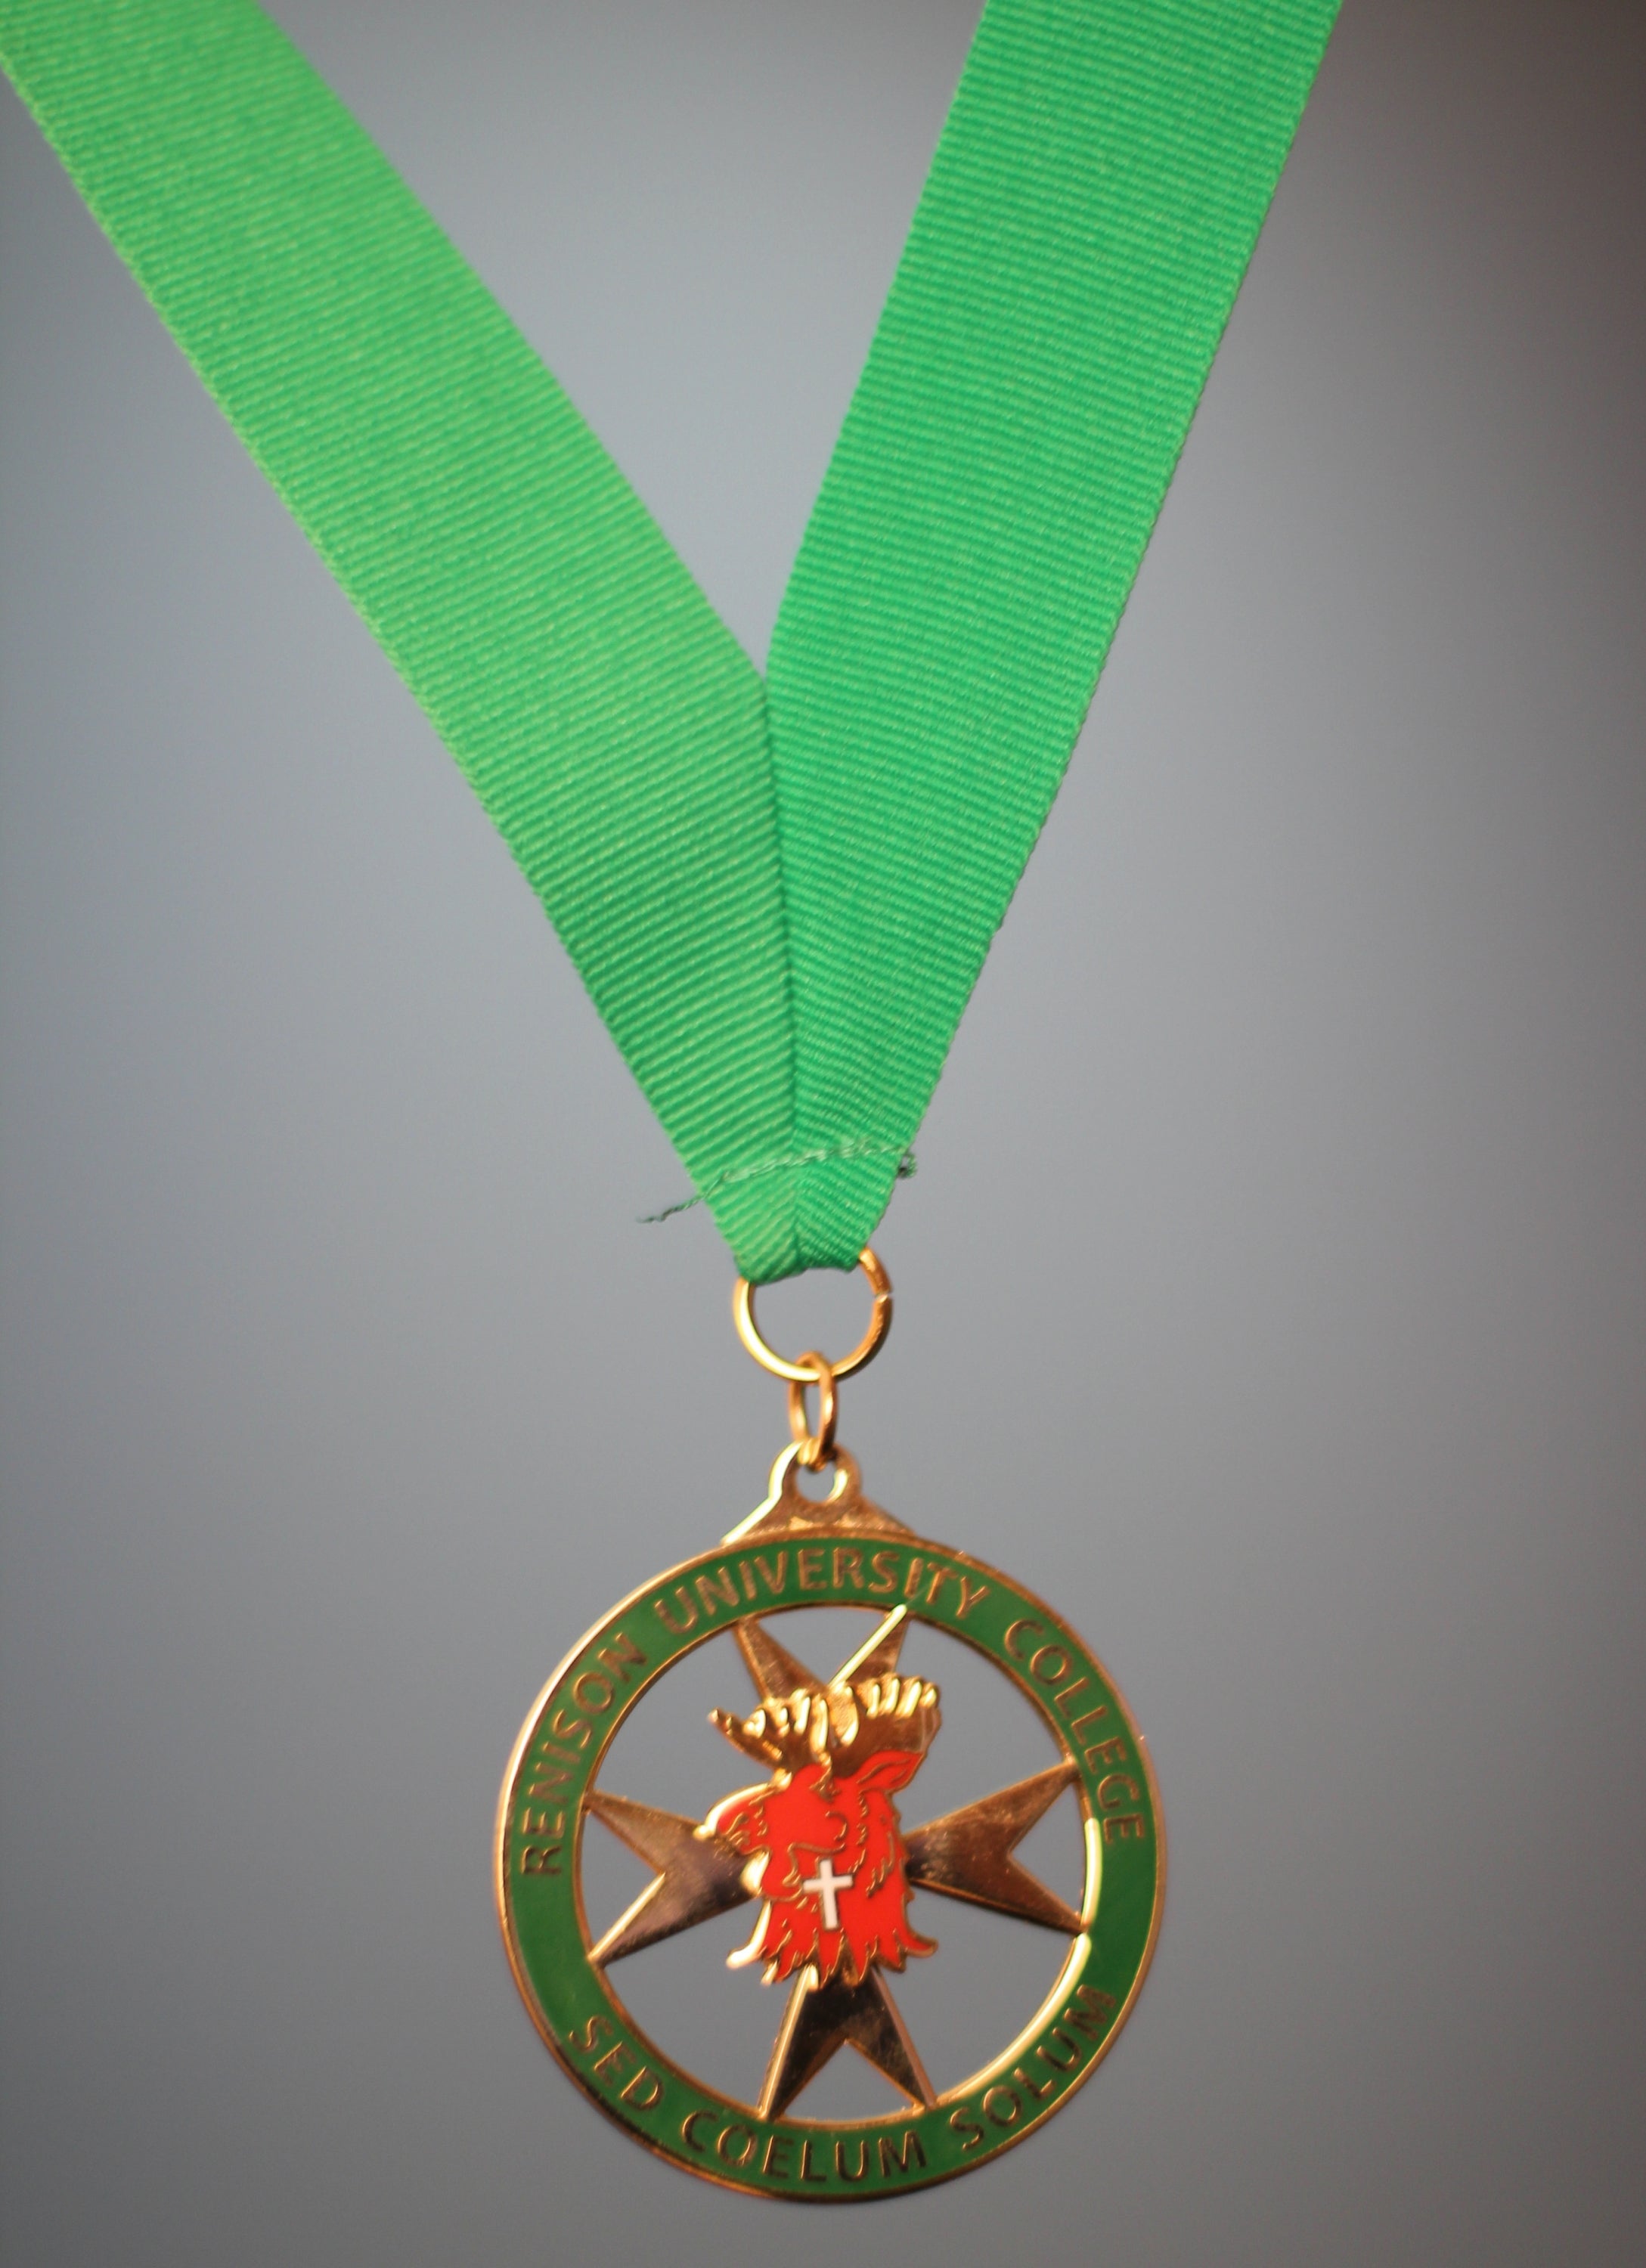 A green medal hung from a green ribbon.